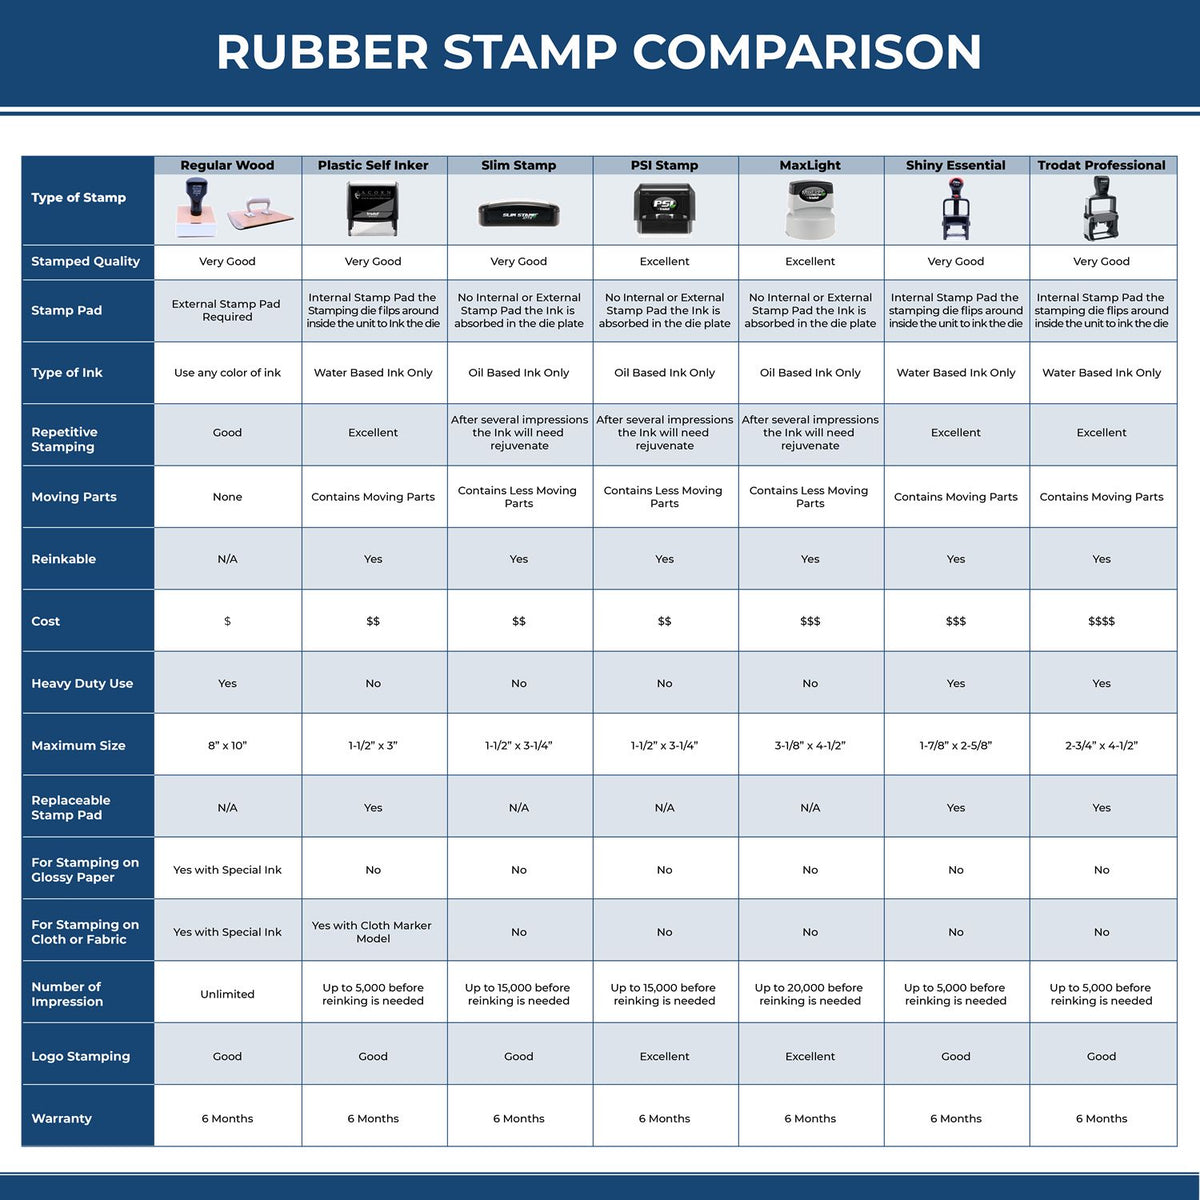 Read and Route with Lines Rubber Stamp 4810R Rubber Stamp Comparison